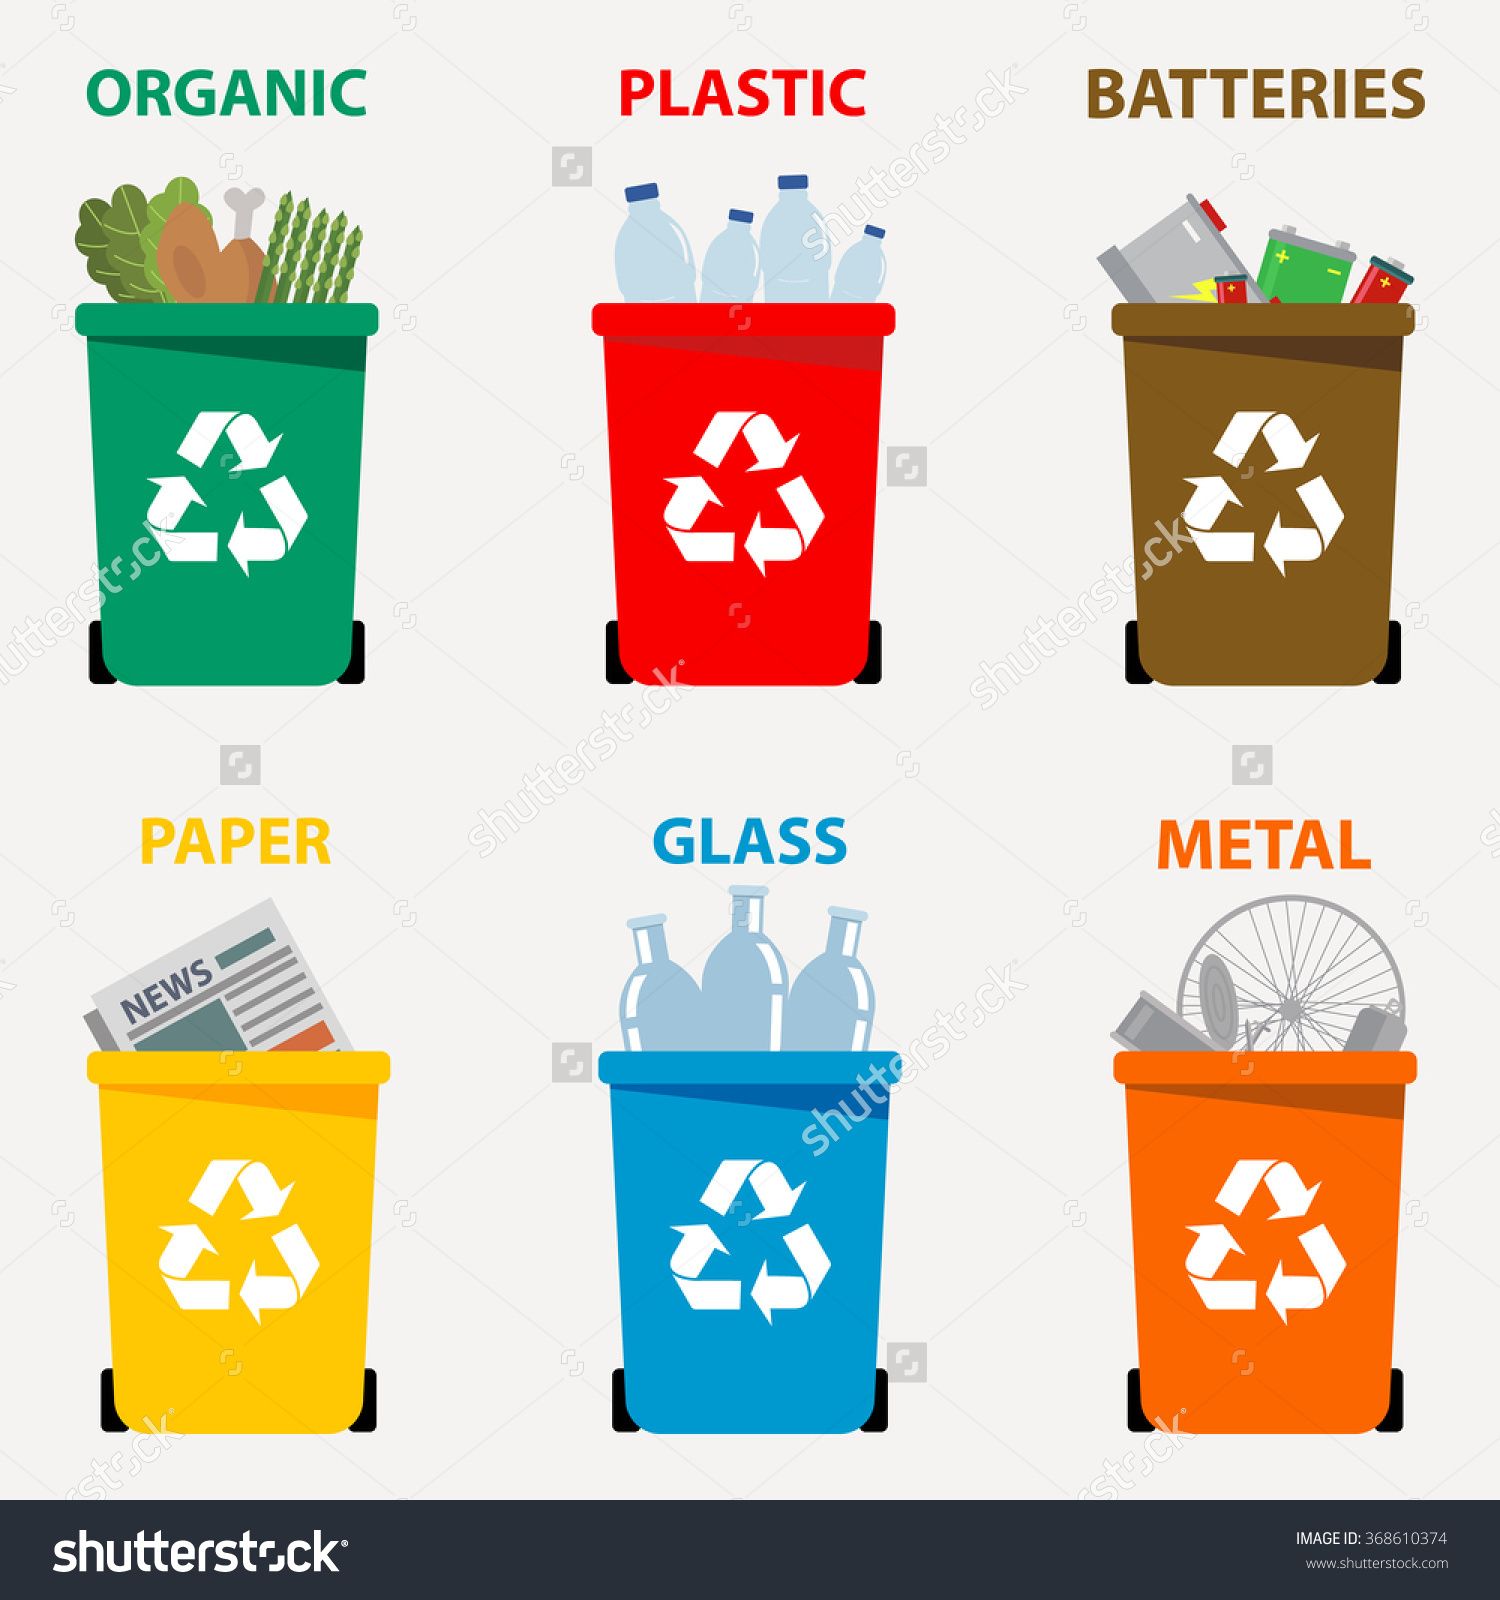 pollution clipart waste separation